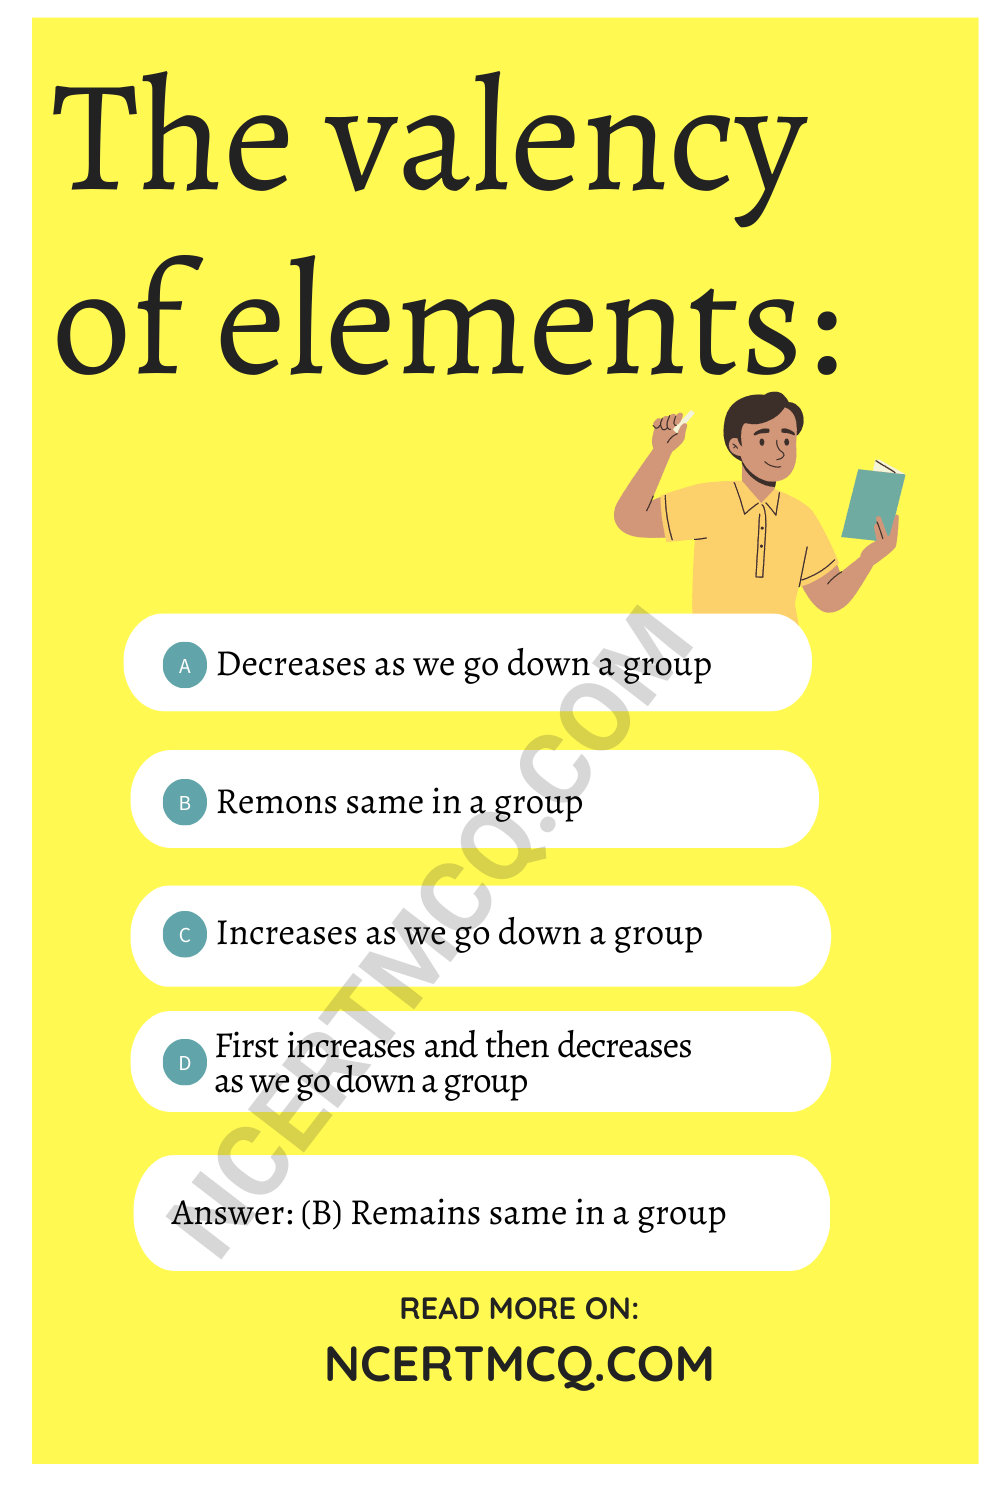 The valency of elements: